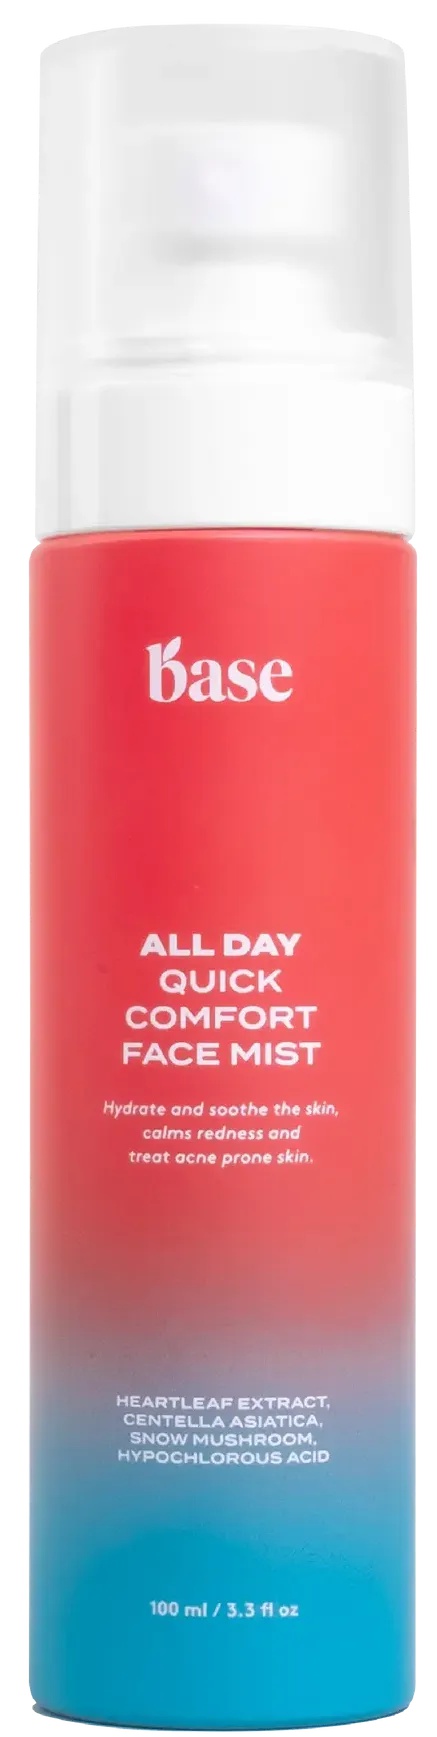 Base All Day Quick Comfort Face Mist